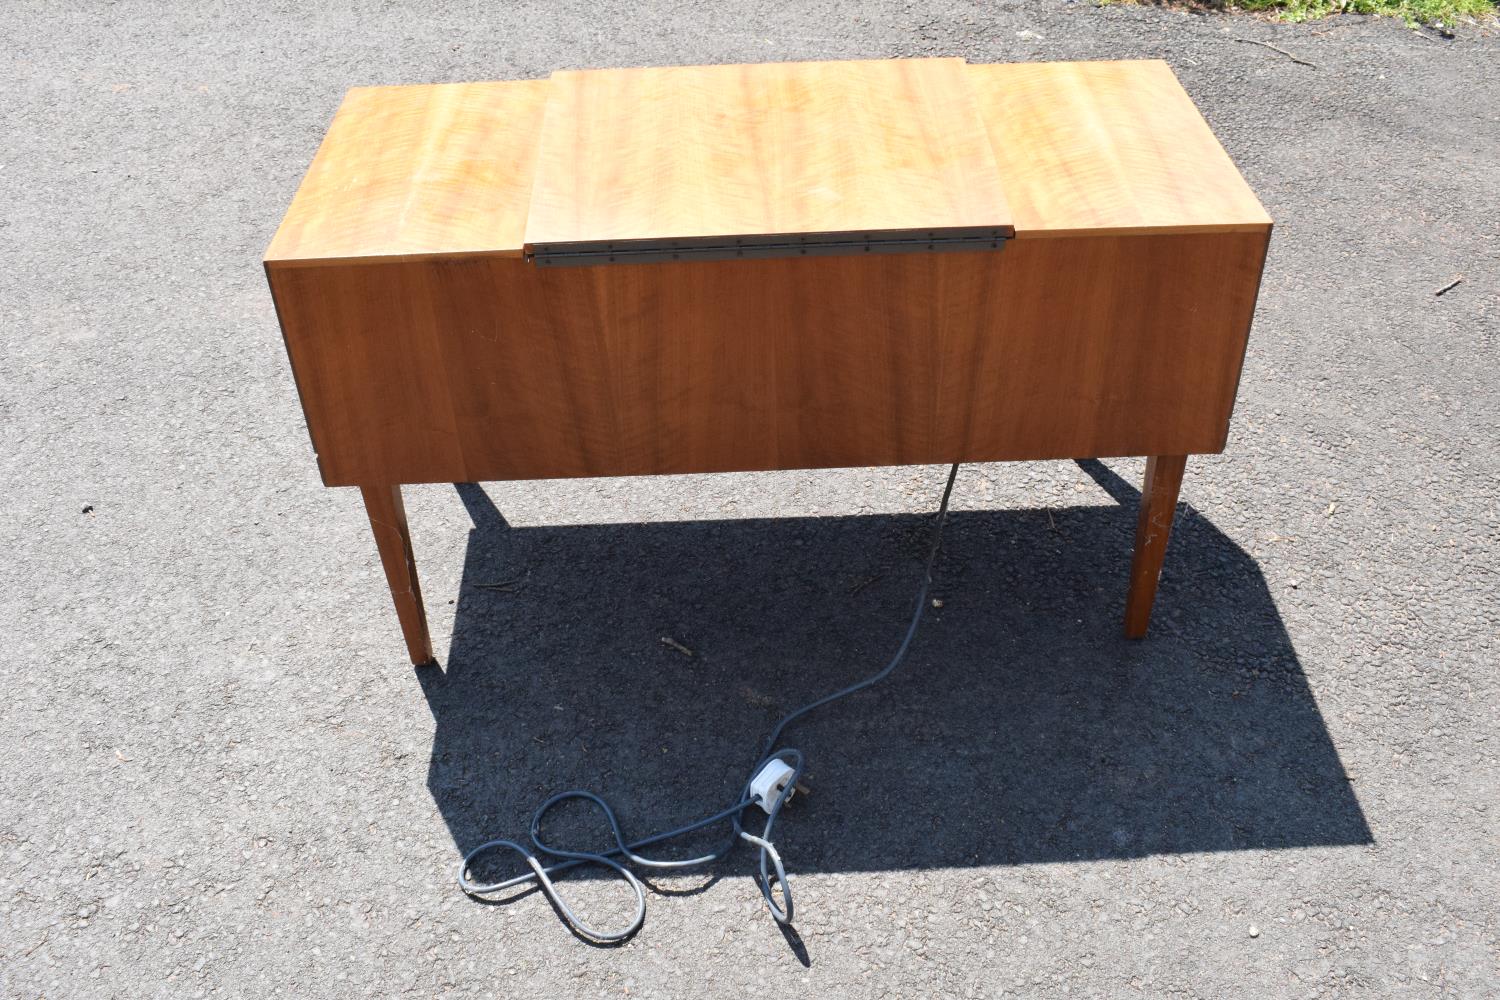 HMV teak radiogram unit. 96 x 44 x 60cm. In good condition with signs of age-related wear and - Image 6 of 6